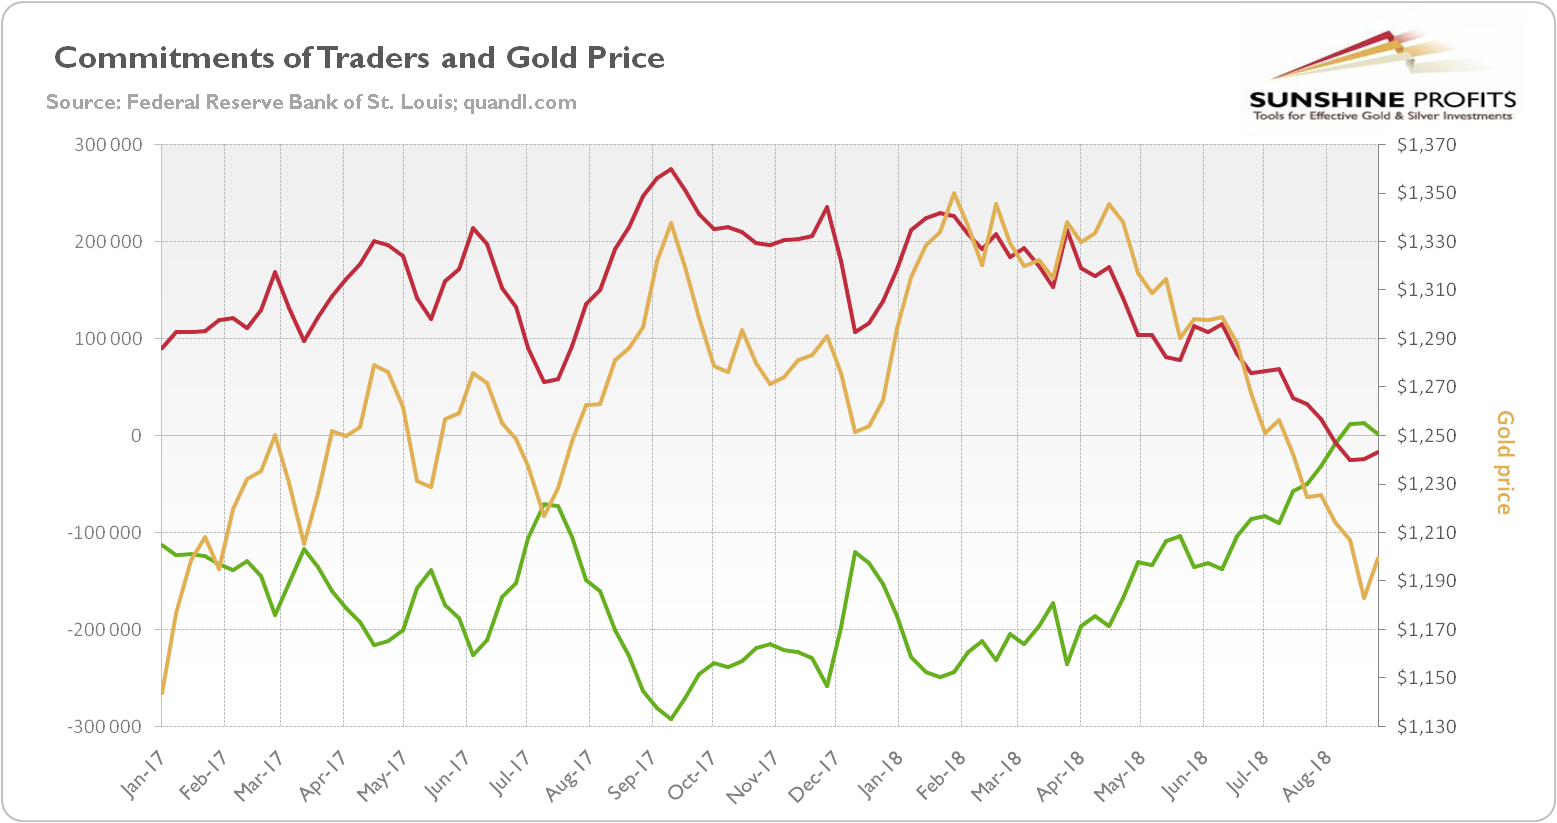 Gold prices (yellow line, right axis, London P.M. fixing, in $), net position of commercials (green line, left axis) and net position of non-commercials (red line, left axis)